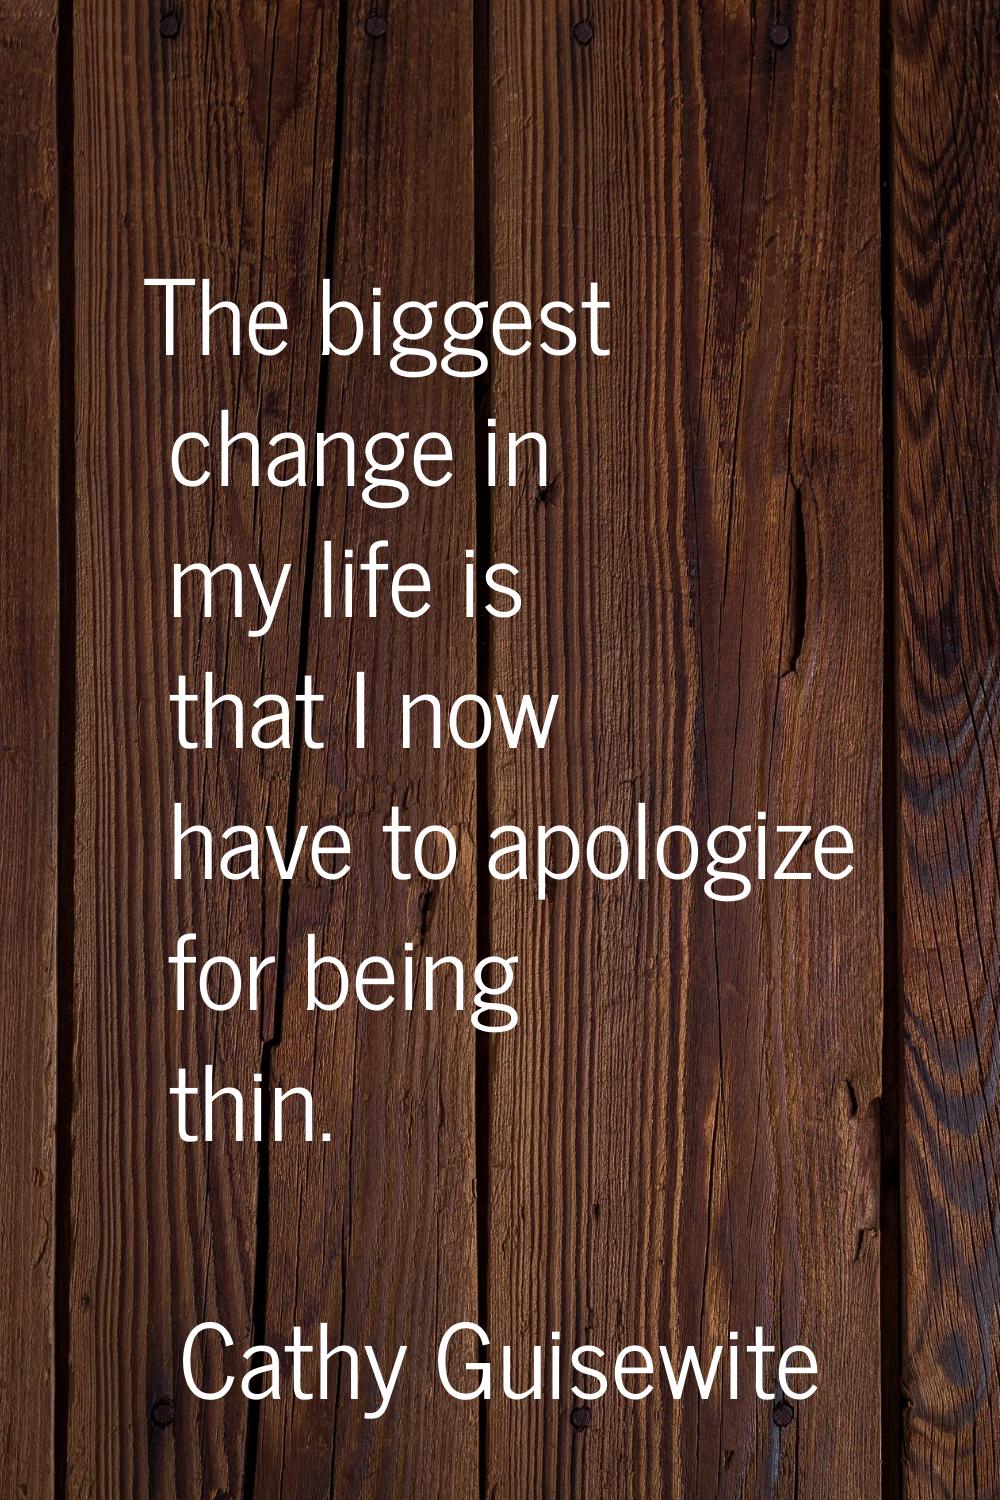 The biggest change in my life is that I now have to apologize for being thin.